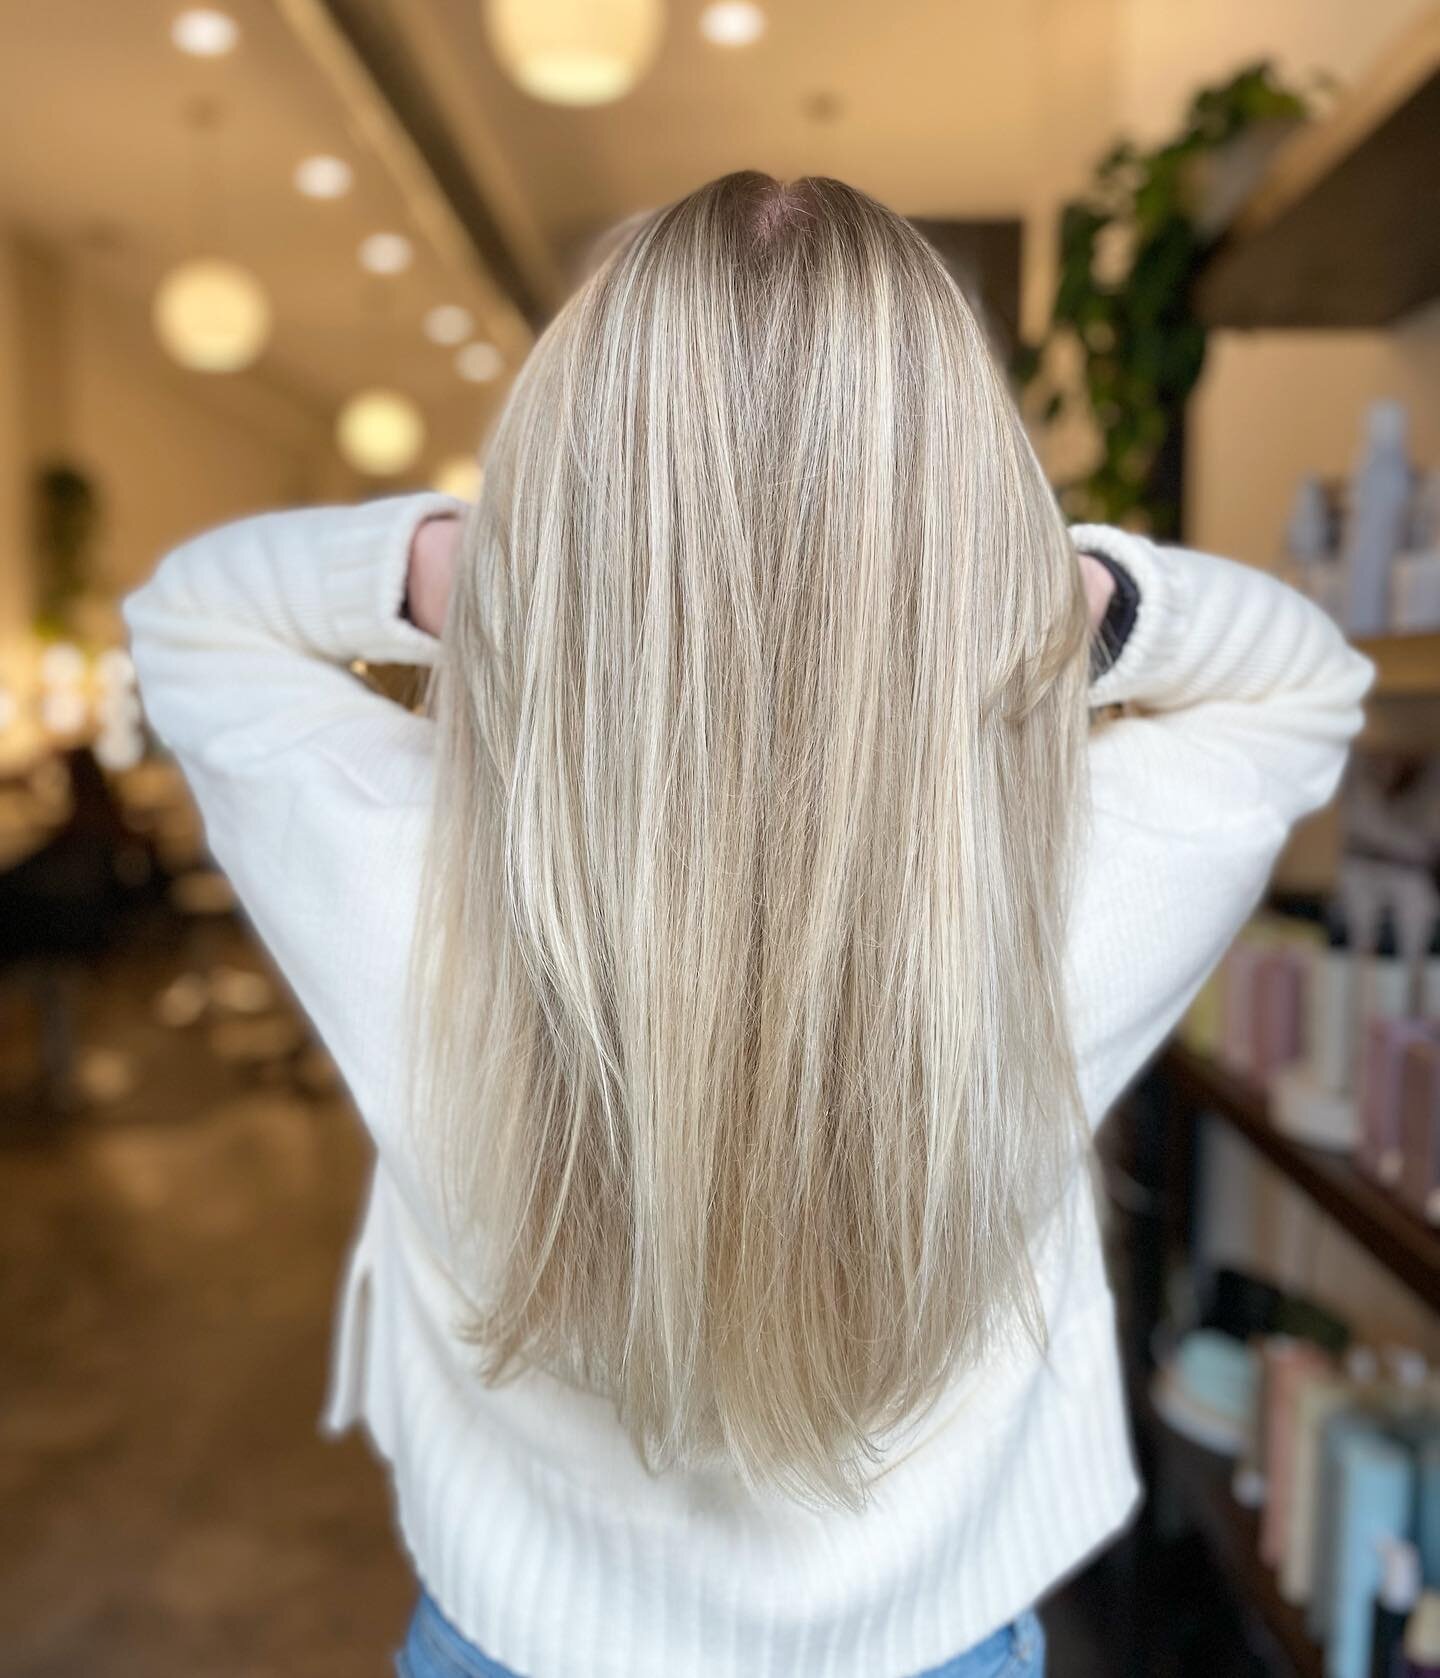 We love a long lasting color around here! Here are the deets on this service ⬇️

Service: Half head lived in color + shadow root
Appointment time commitment: 2.5-3 hours
Cost: $260
Maintenance: +/- 12 weeks 

#chicagohairstylist #chicagoblonde #linco